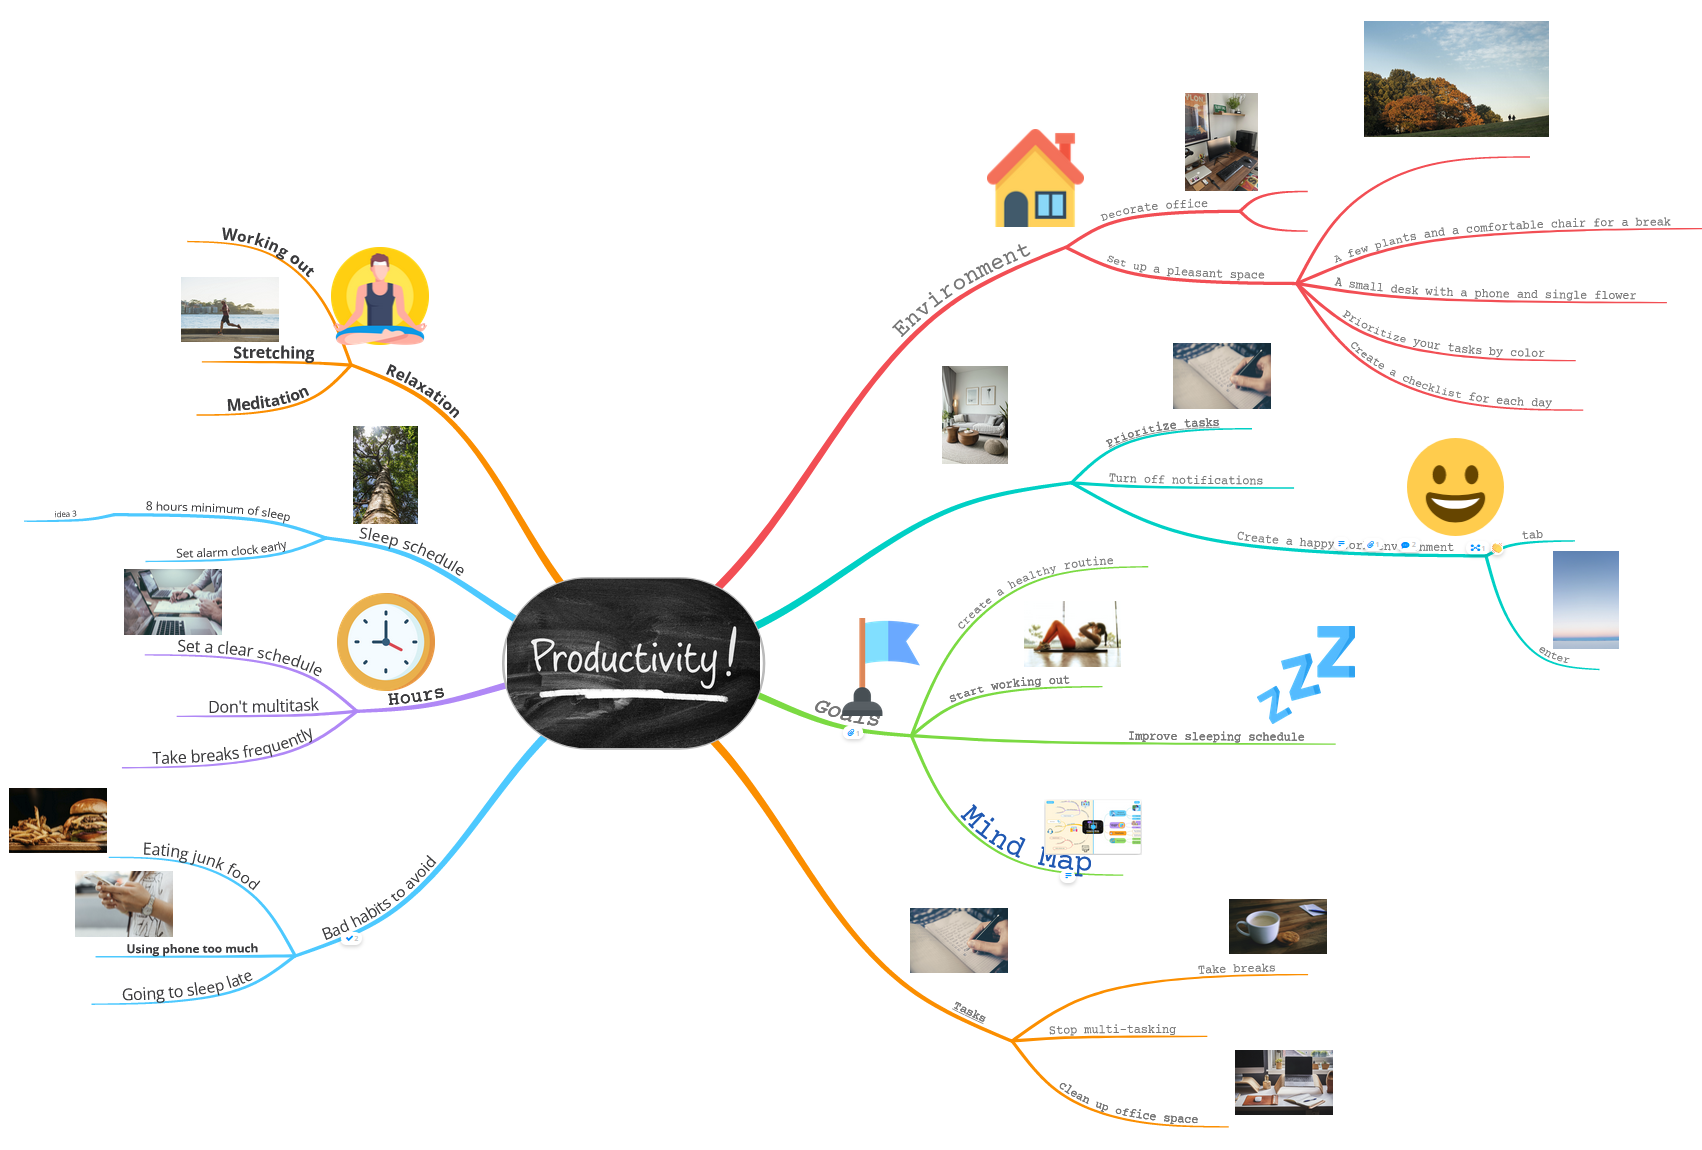 Map in the mind map style view.